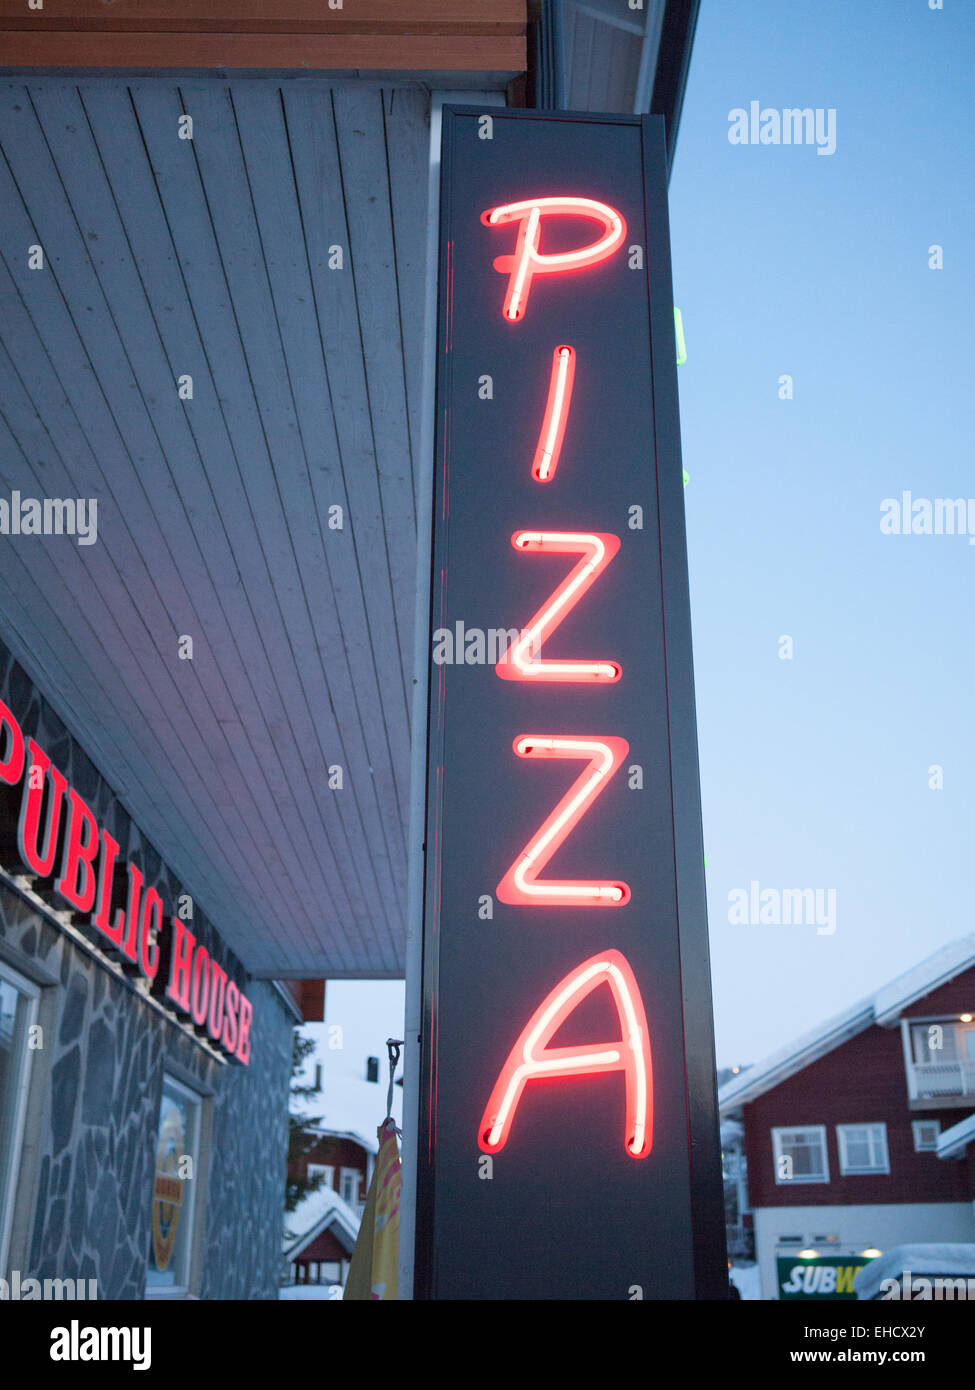 A neon sign advertising a pizza restaurant and takeaway in the ski resort  of levi, Lapland, Finland Stock Photo - Alamy